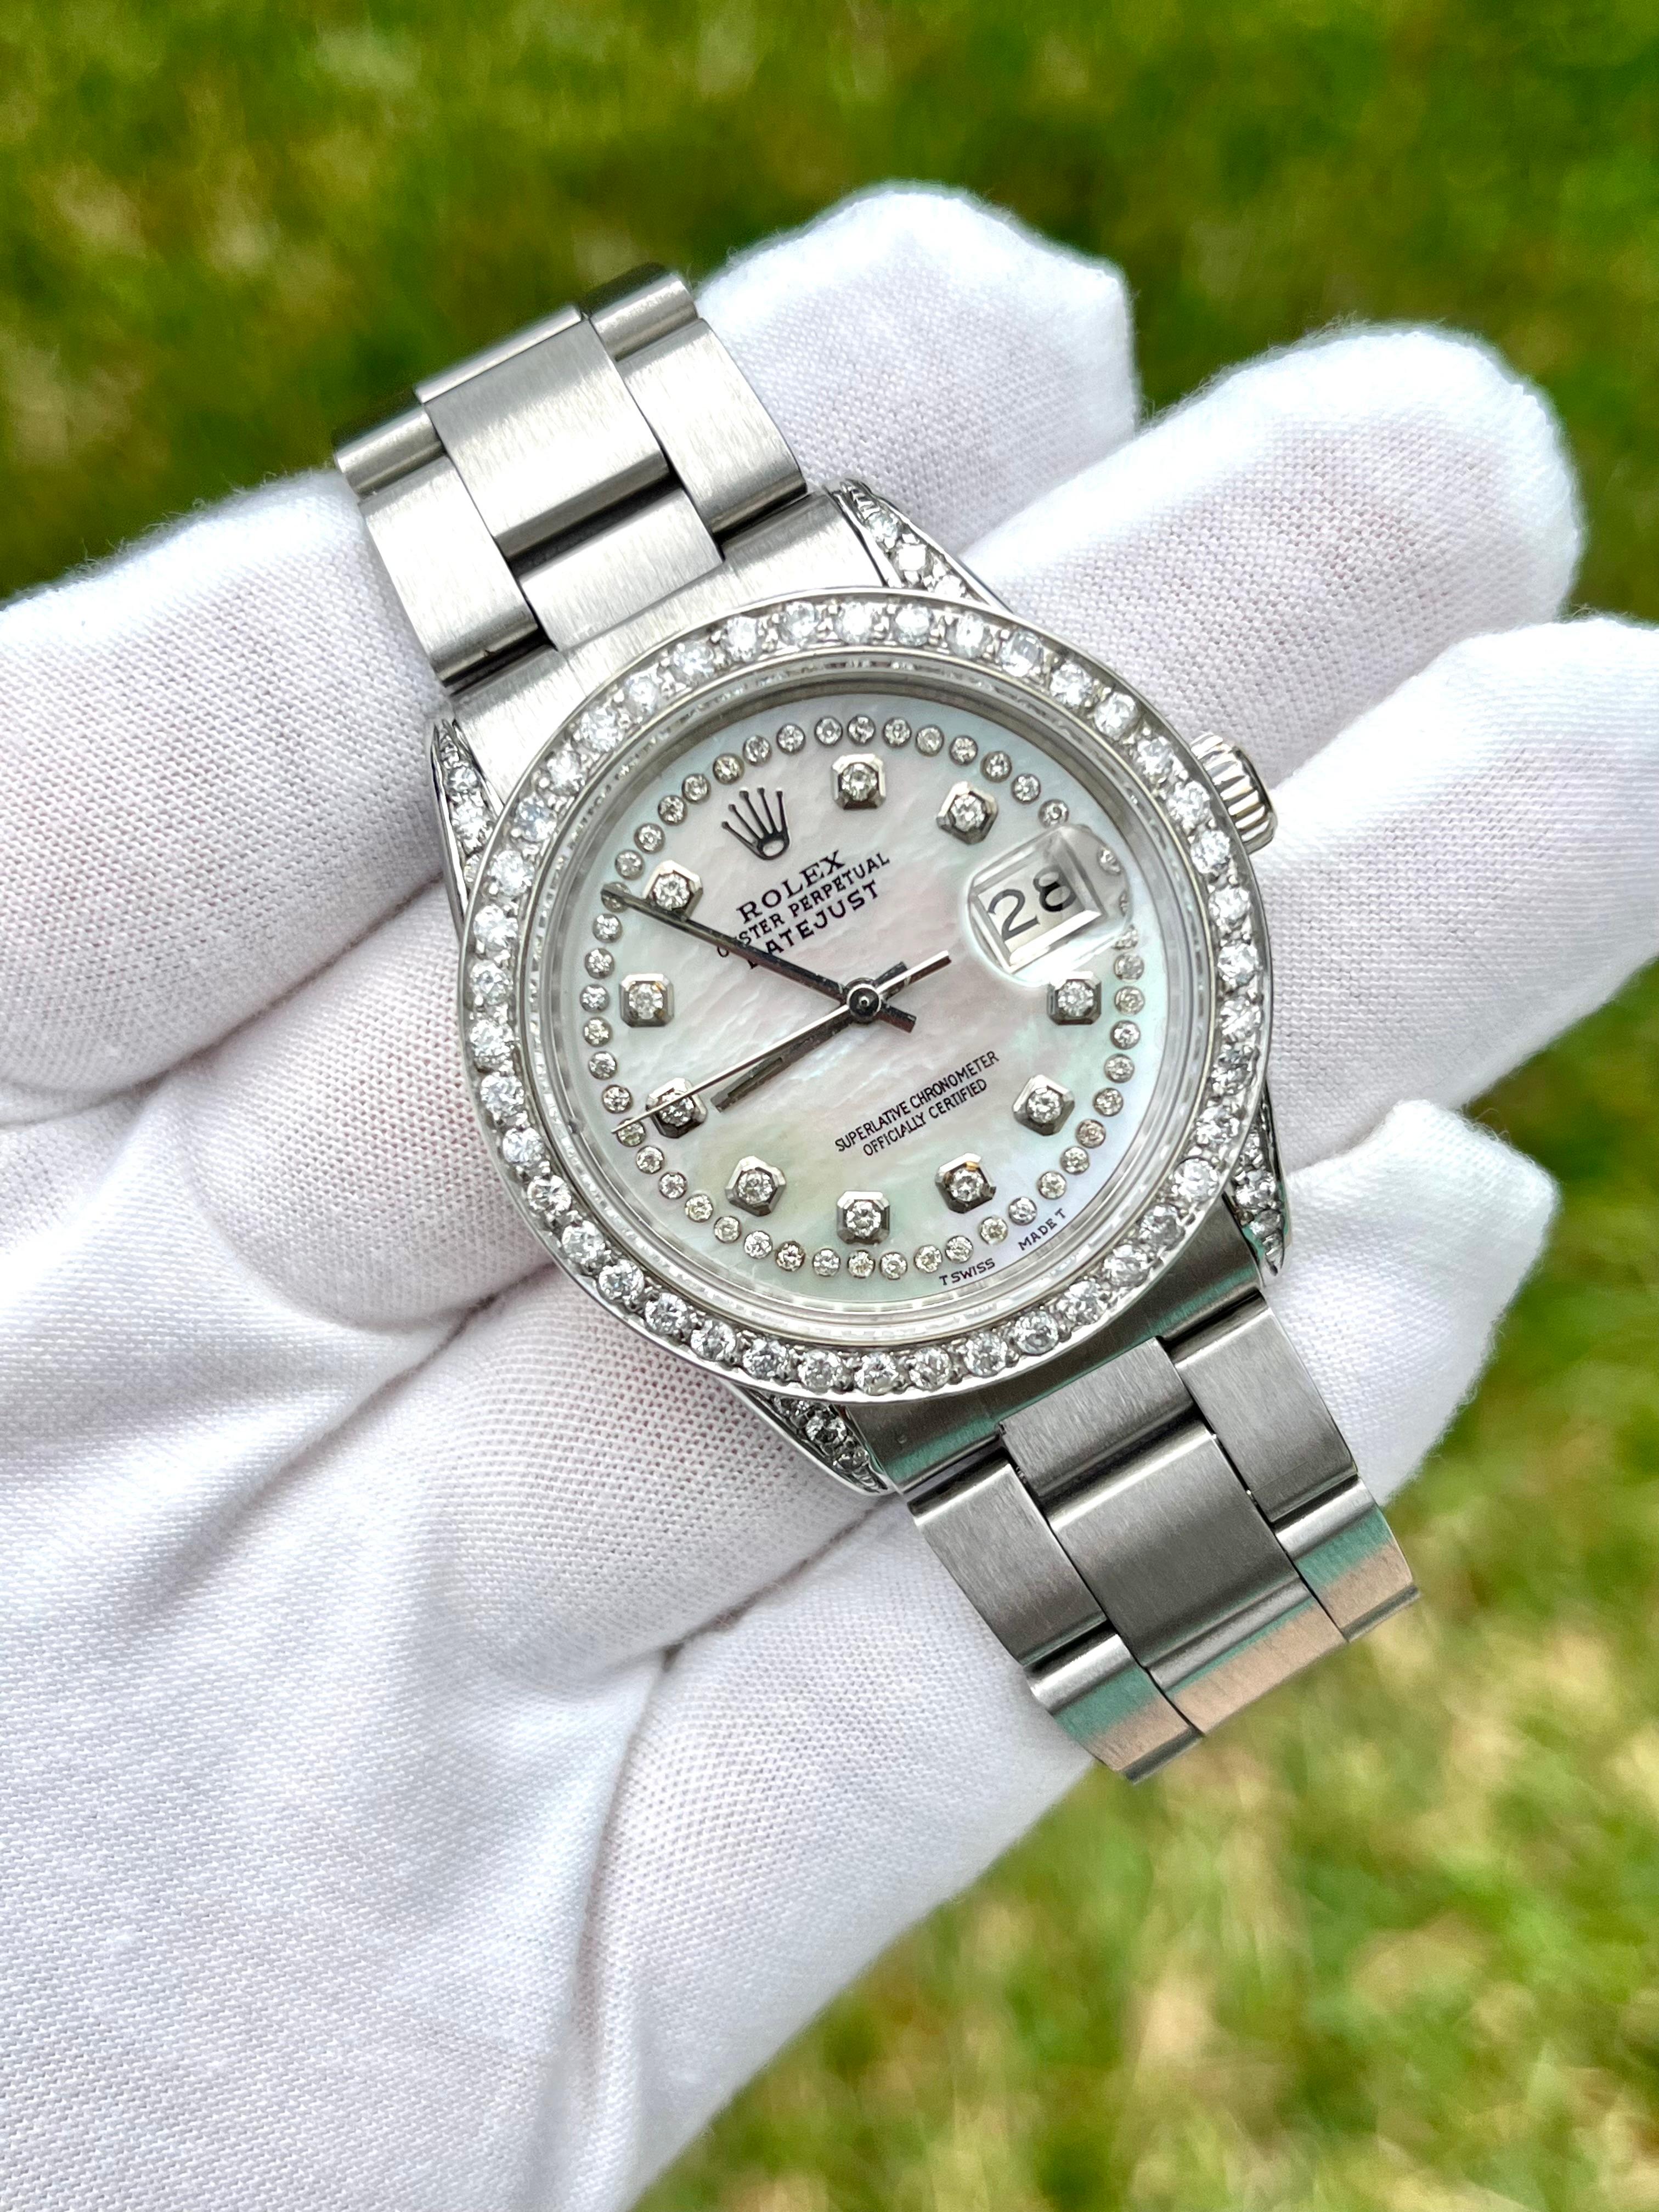 36mm Rolex DateJust with Mother of Pearl dial and Rolex Factory Diamond hour markers. Stainless steel Oyster band with hidden fold over closure. A unique twist on a timeless classic. This watch separates itself from other DateJust models with its